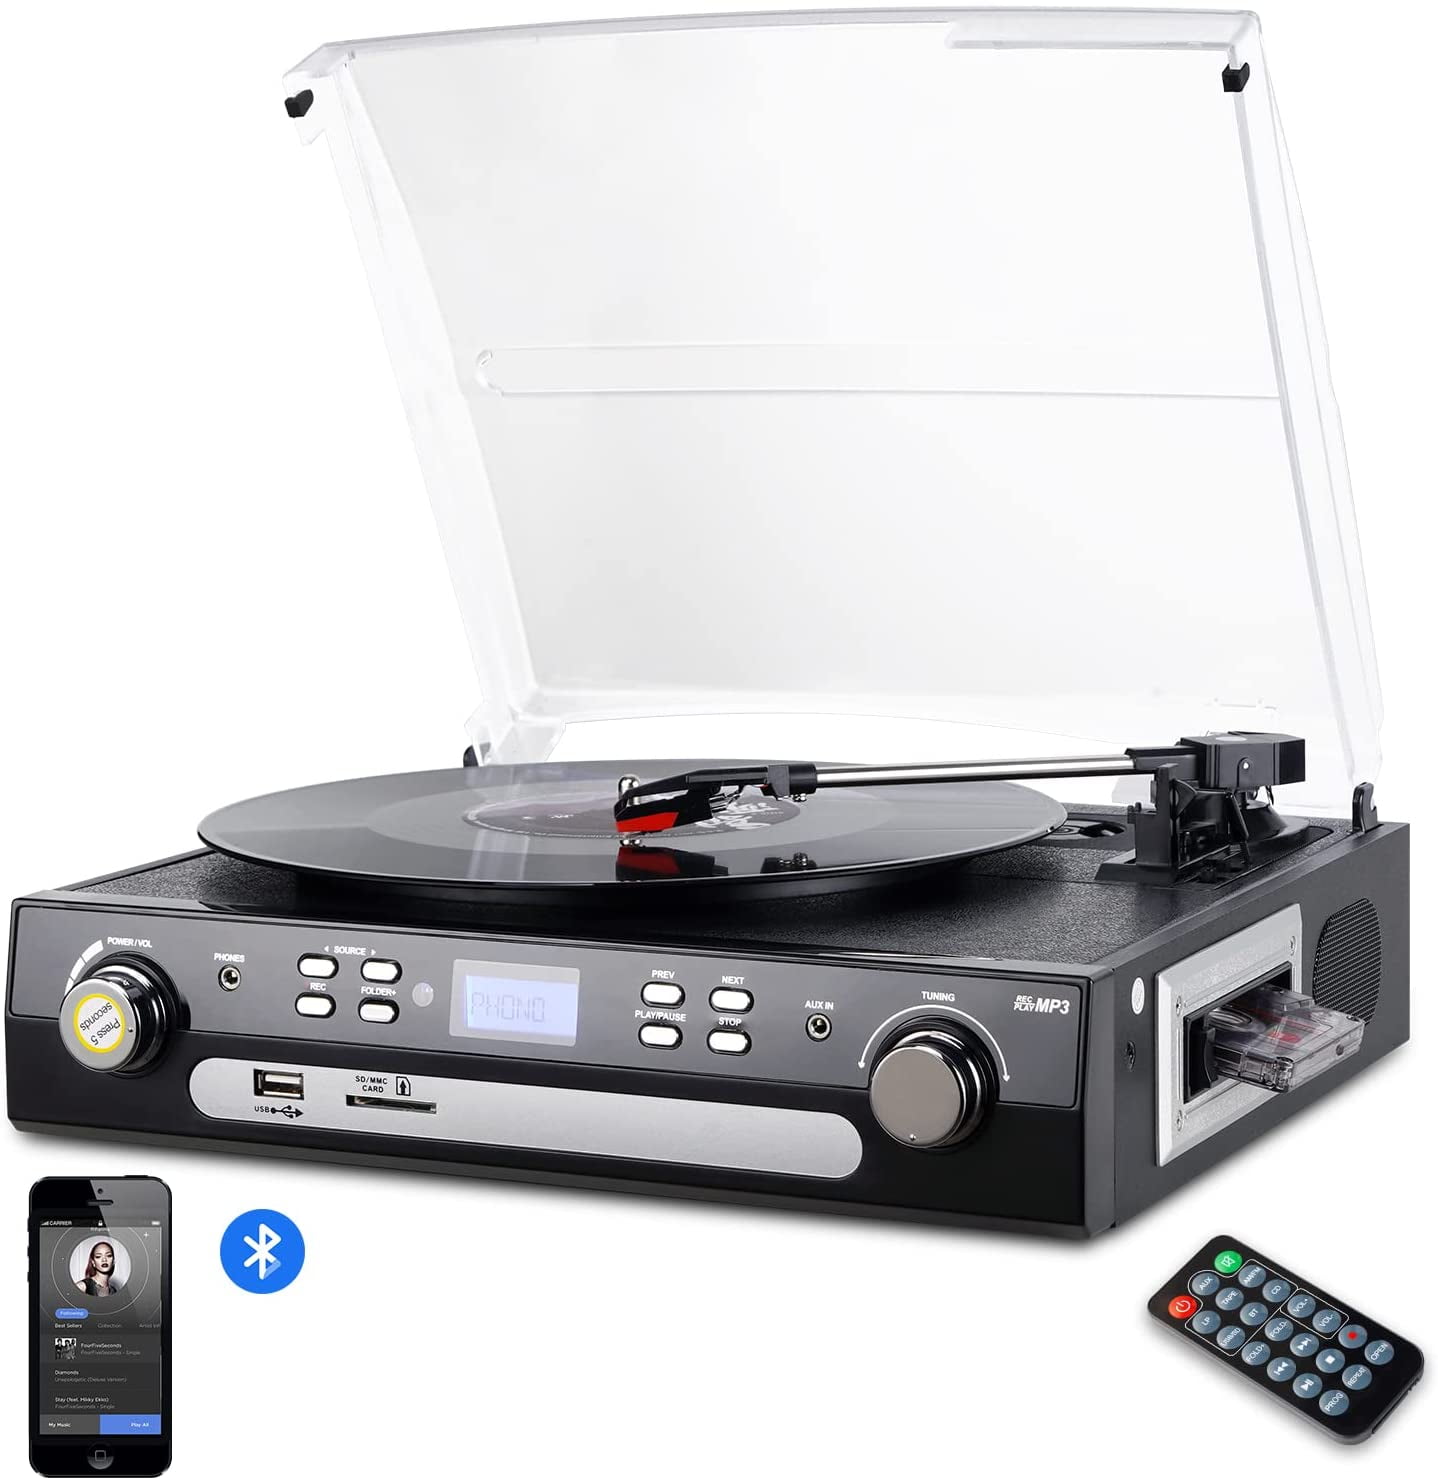 All in One Bluetooth Record Player for Vinyl with Speakers,Cassette,CD,AM/FM Radio,USB/SD Playing and Encoding,Vintage Turntable with 3-Speed AUX in,LINE Out,Earphone Jack,LED Display,Wood 